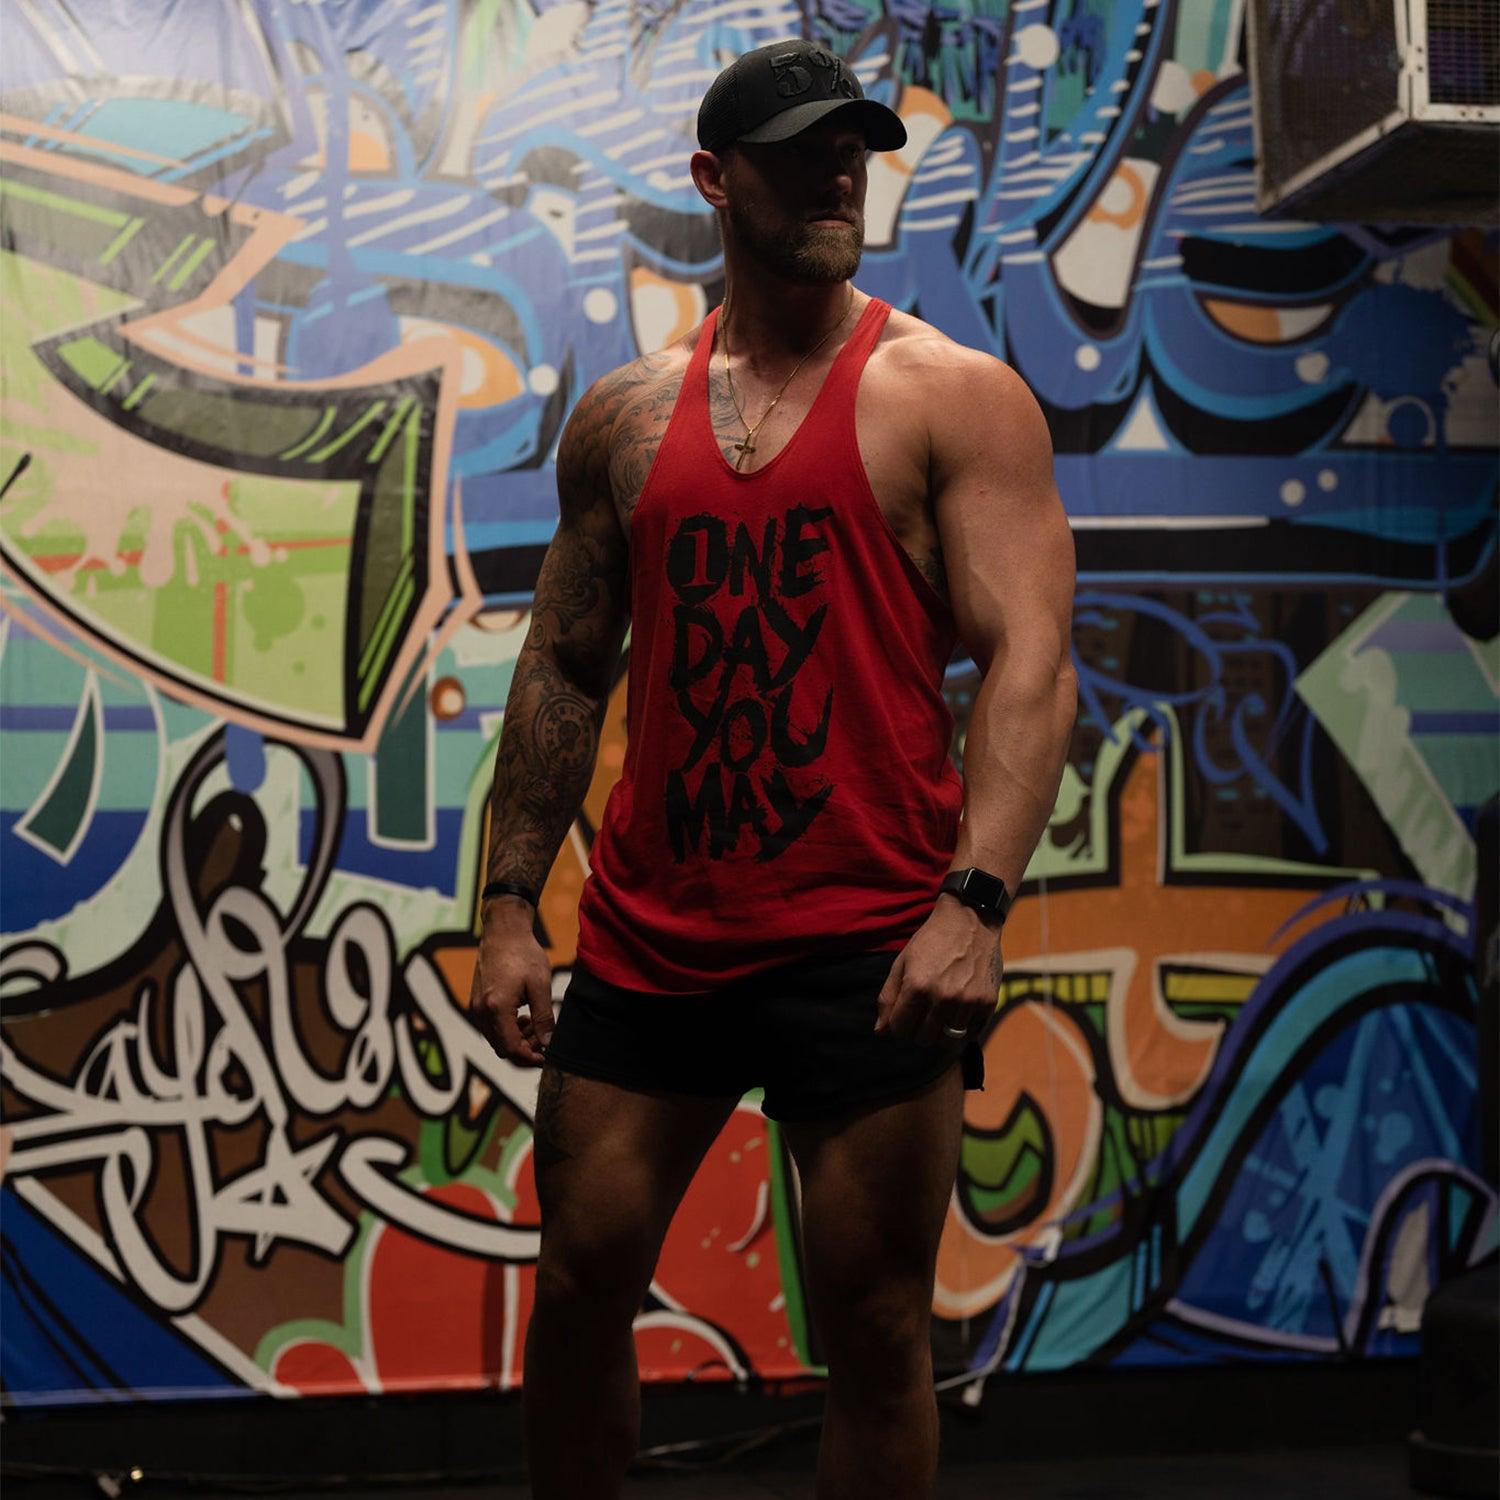 One Day You May, Red Stringer Tank with Black Lettering - 5% Nutrition